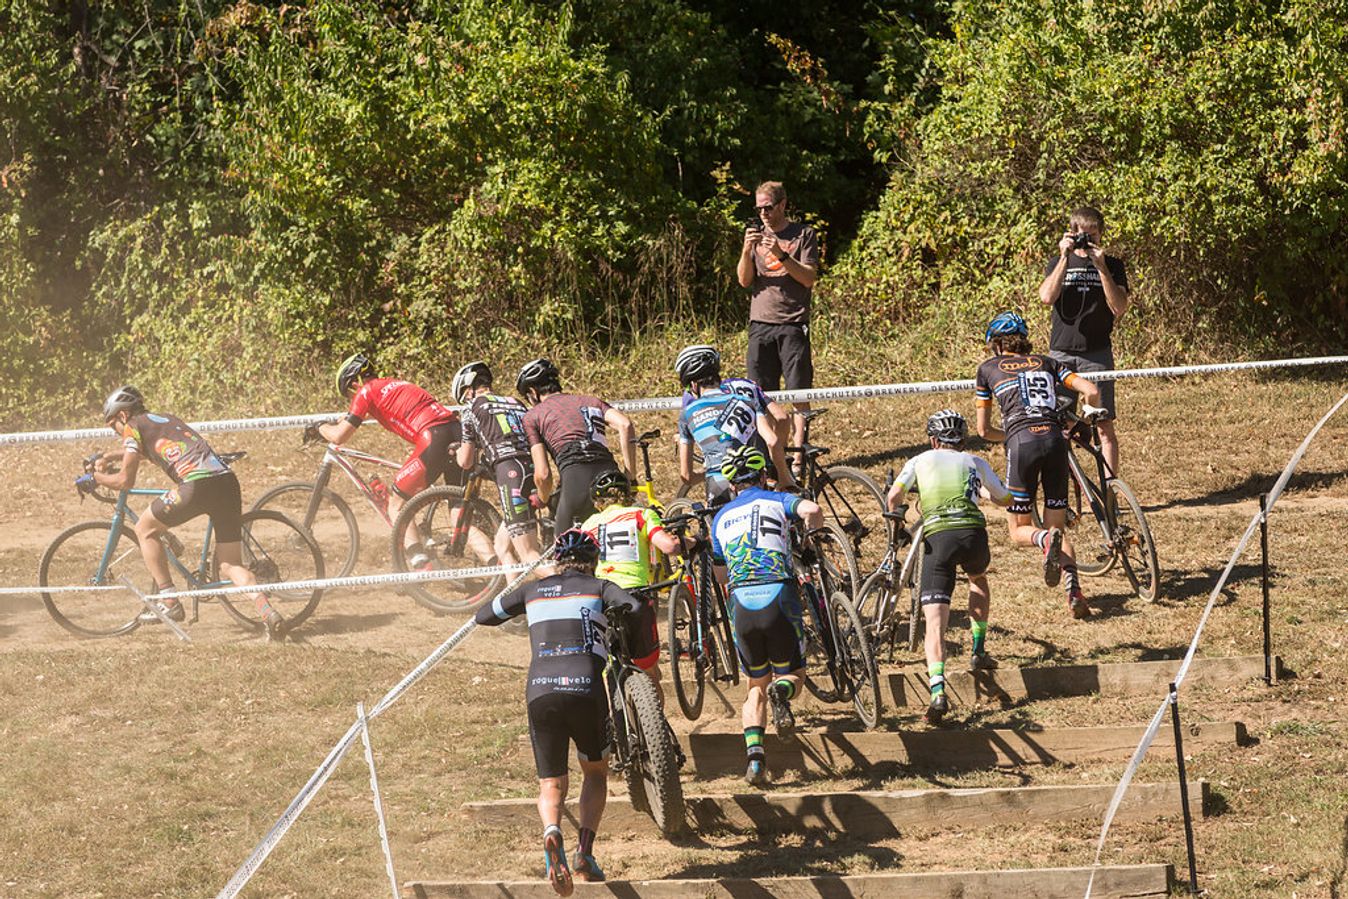 Riders clamber up the steps on a dusty cyclocross section